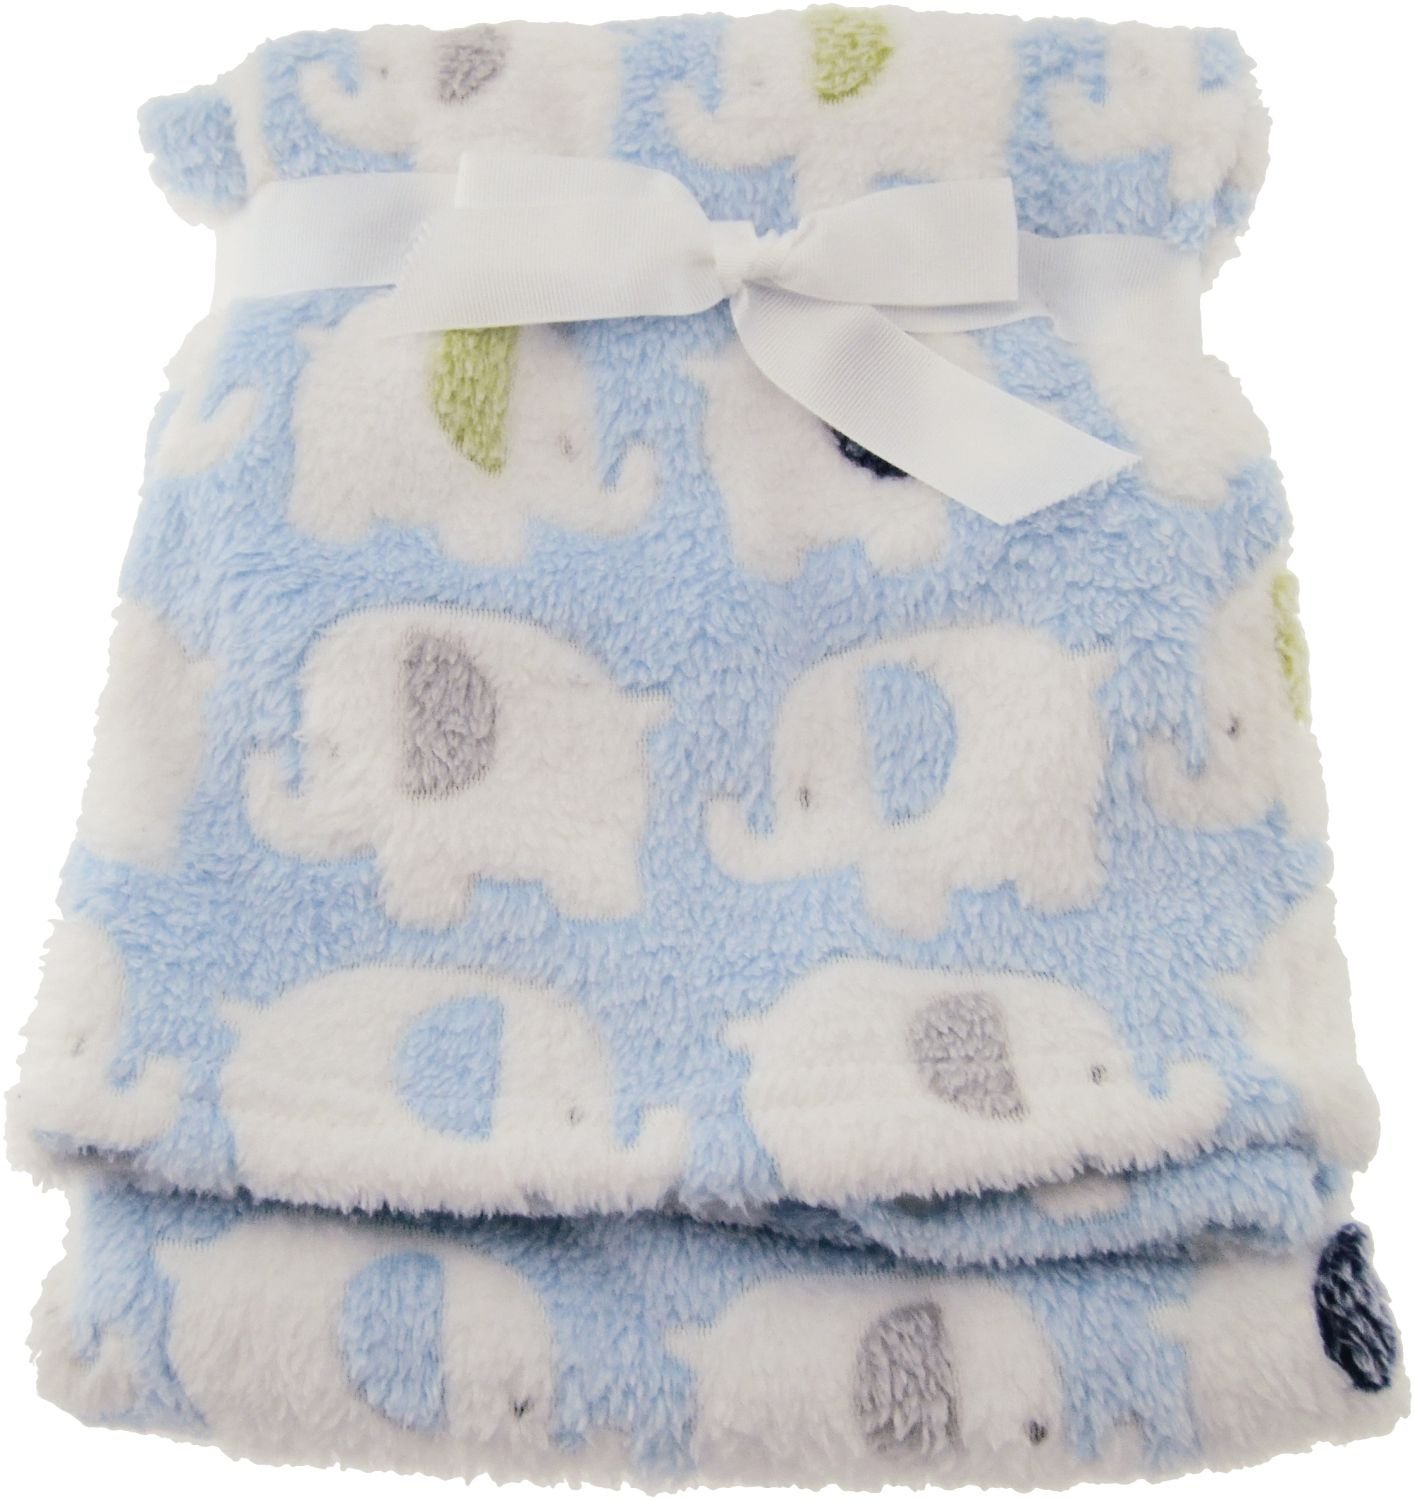 Bieco 04004114 Baby Cuddle Set with Cuddle Blanket and Plush Sheep, Comforter Set with White Blanket with Blue Spots and Soft Toy Sheep for Babies from 3 m + Blue